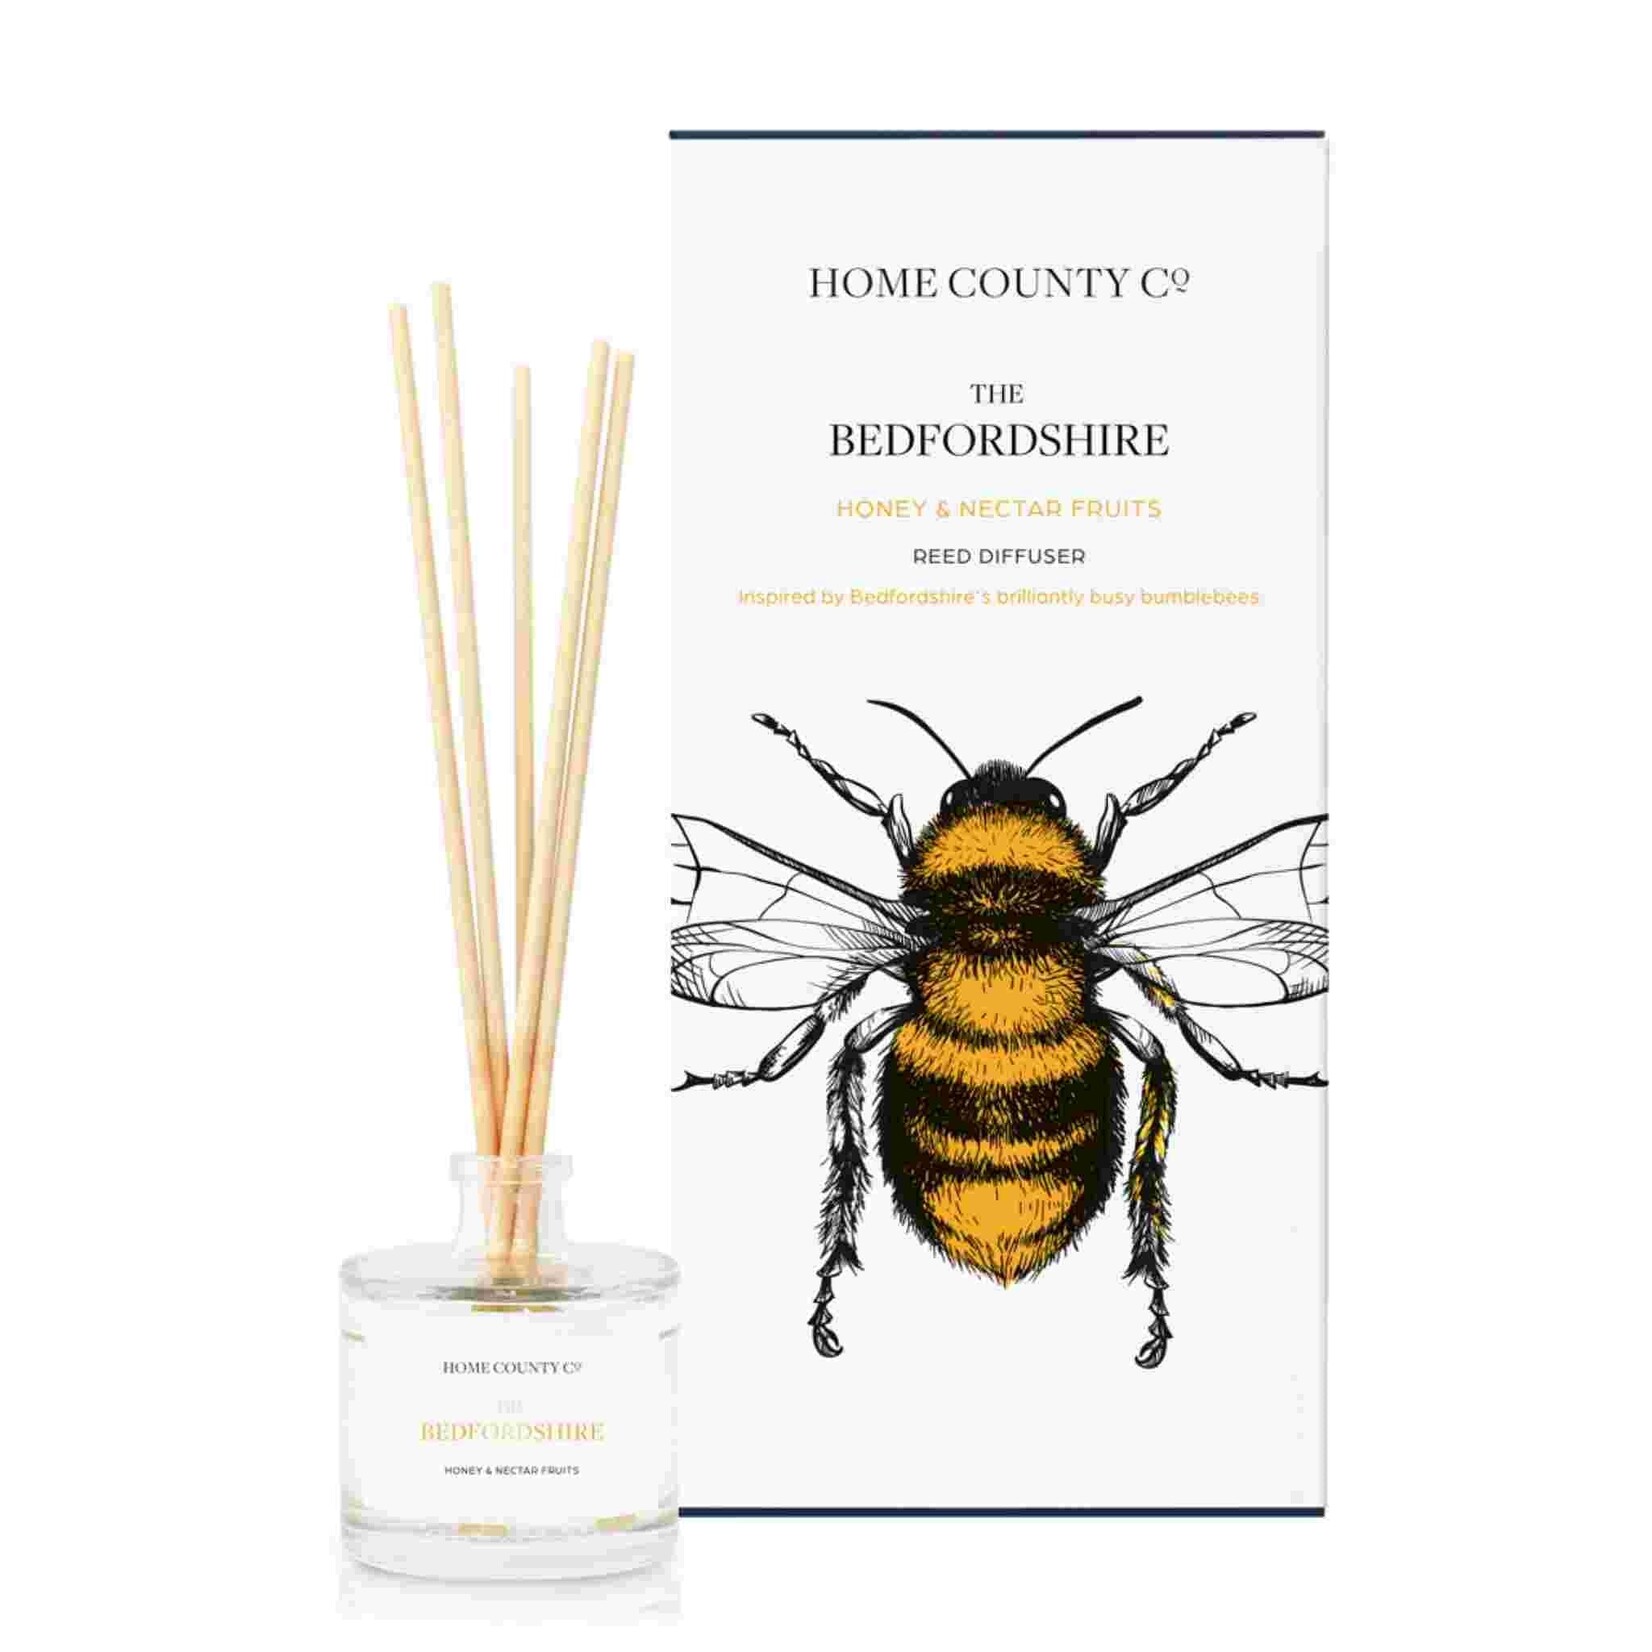 Home County Co. British Reed Diffusers